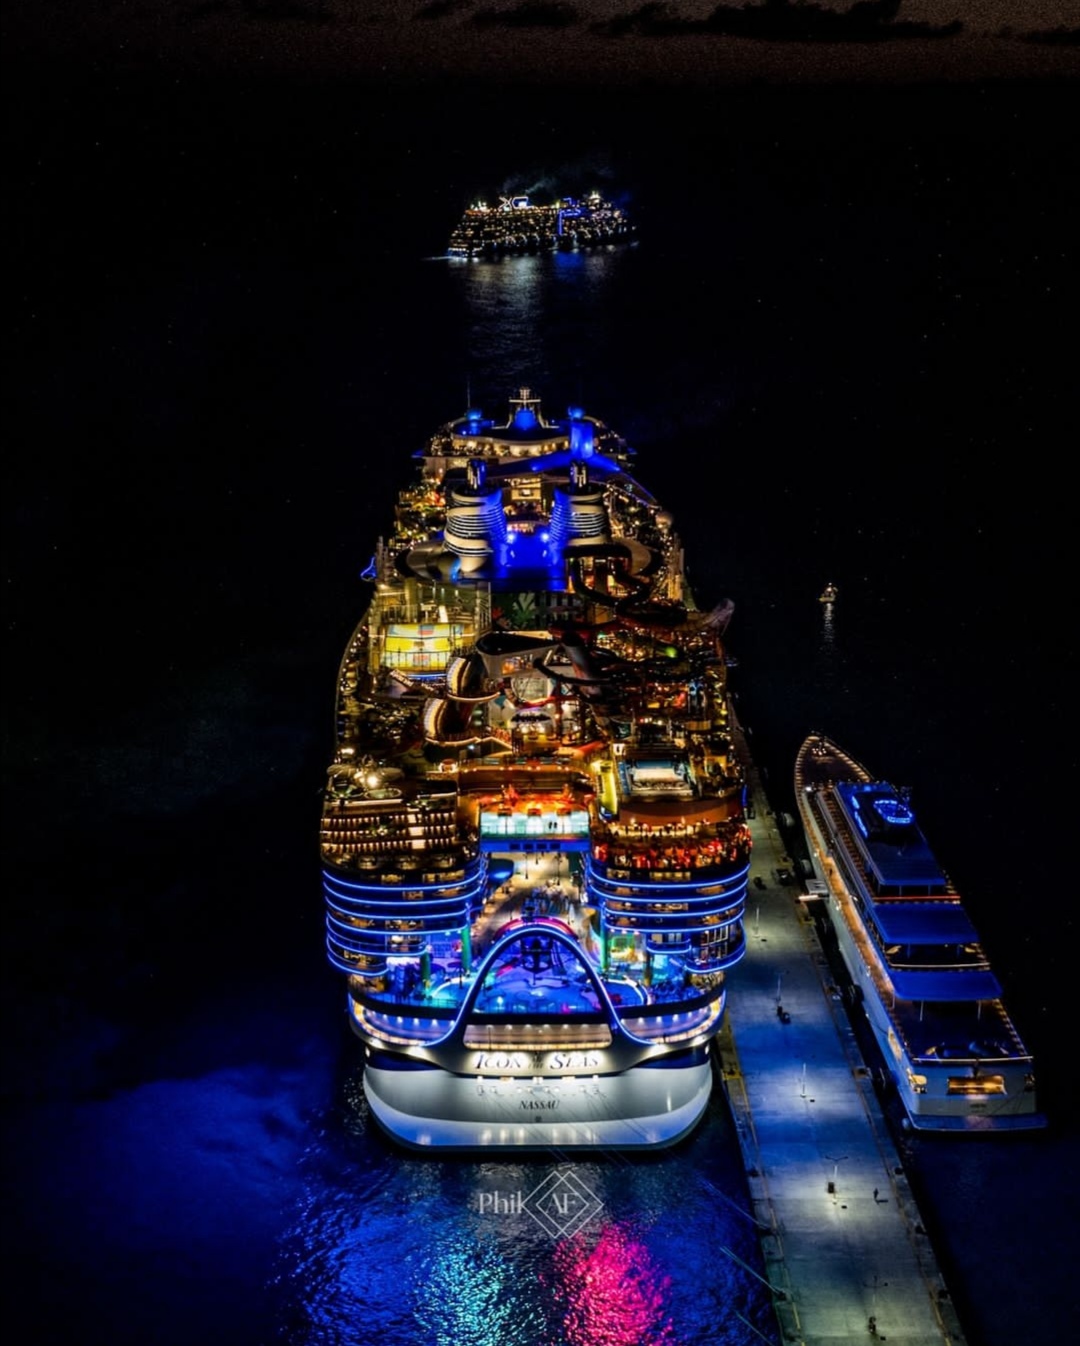 Night view of the icon of the seas